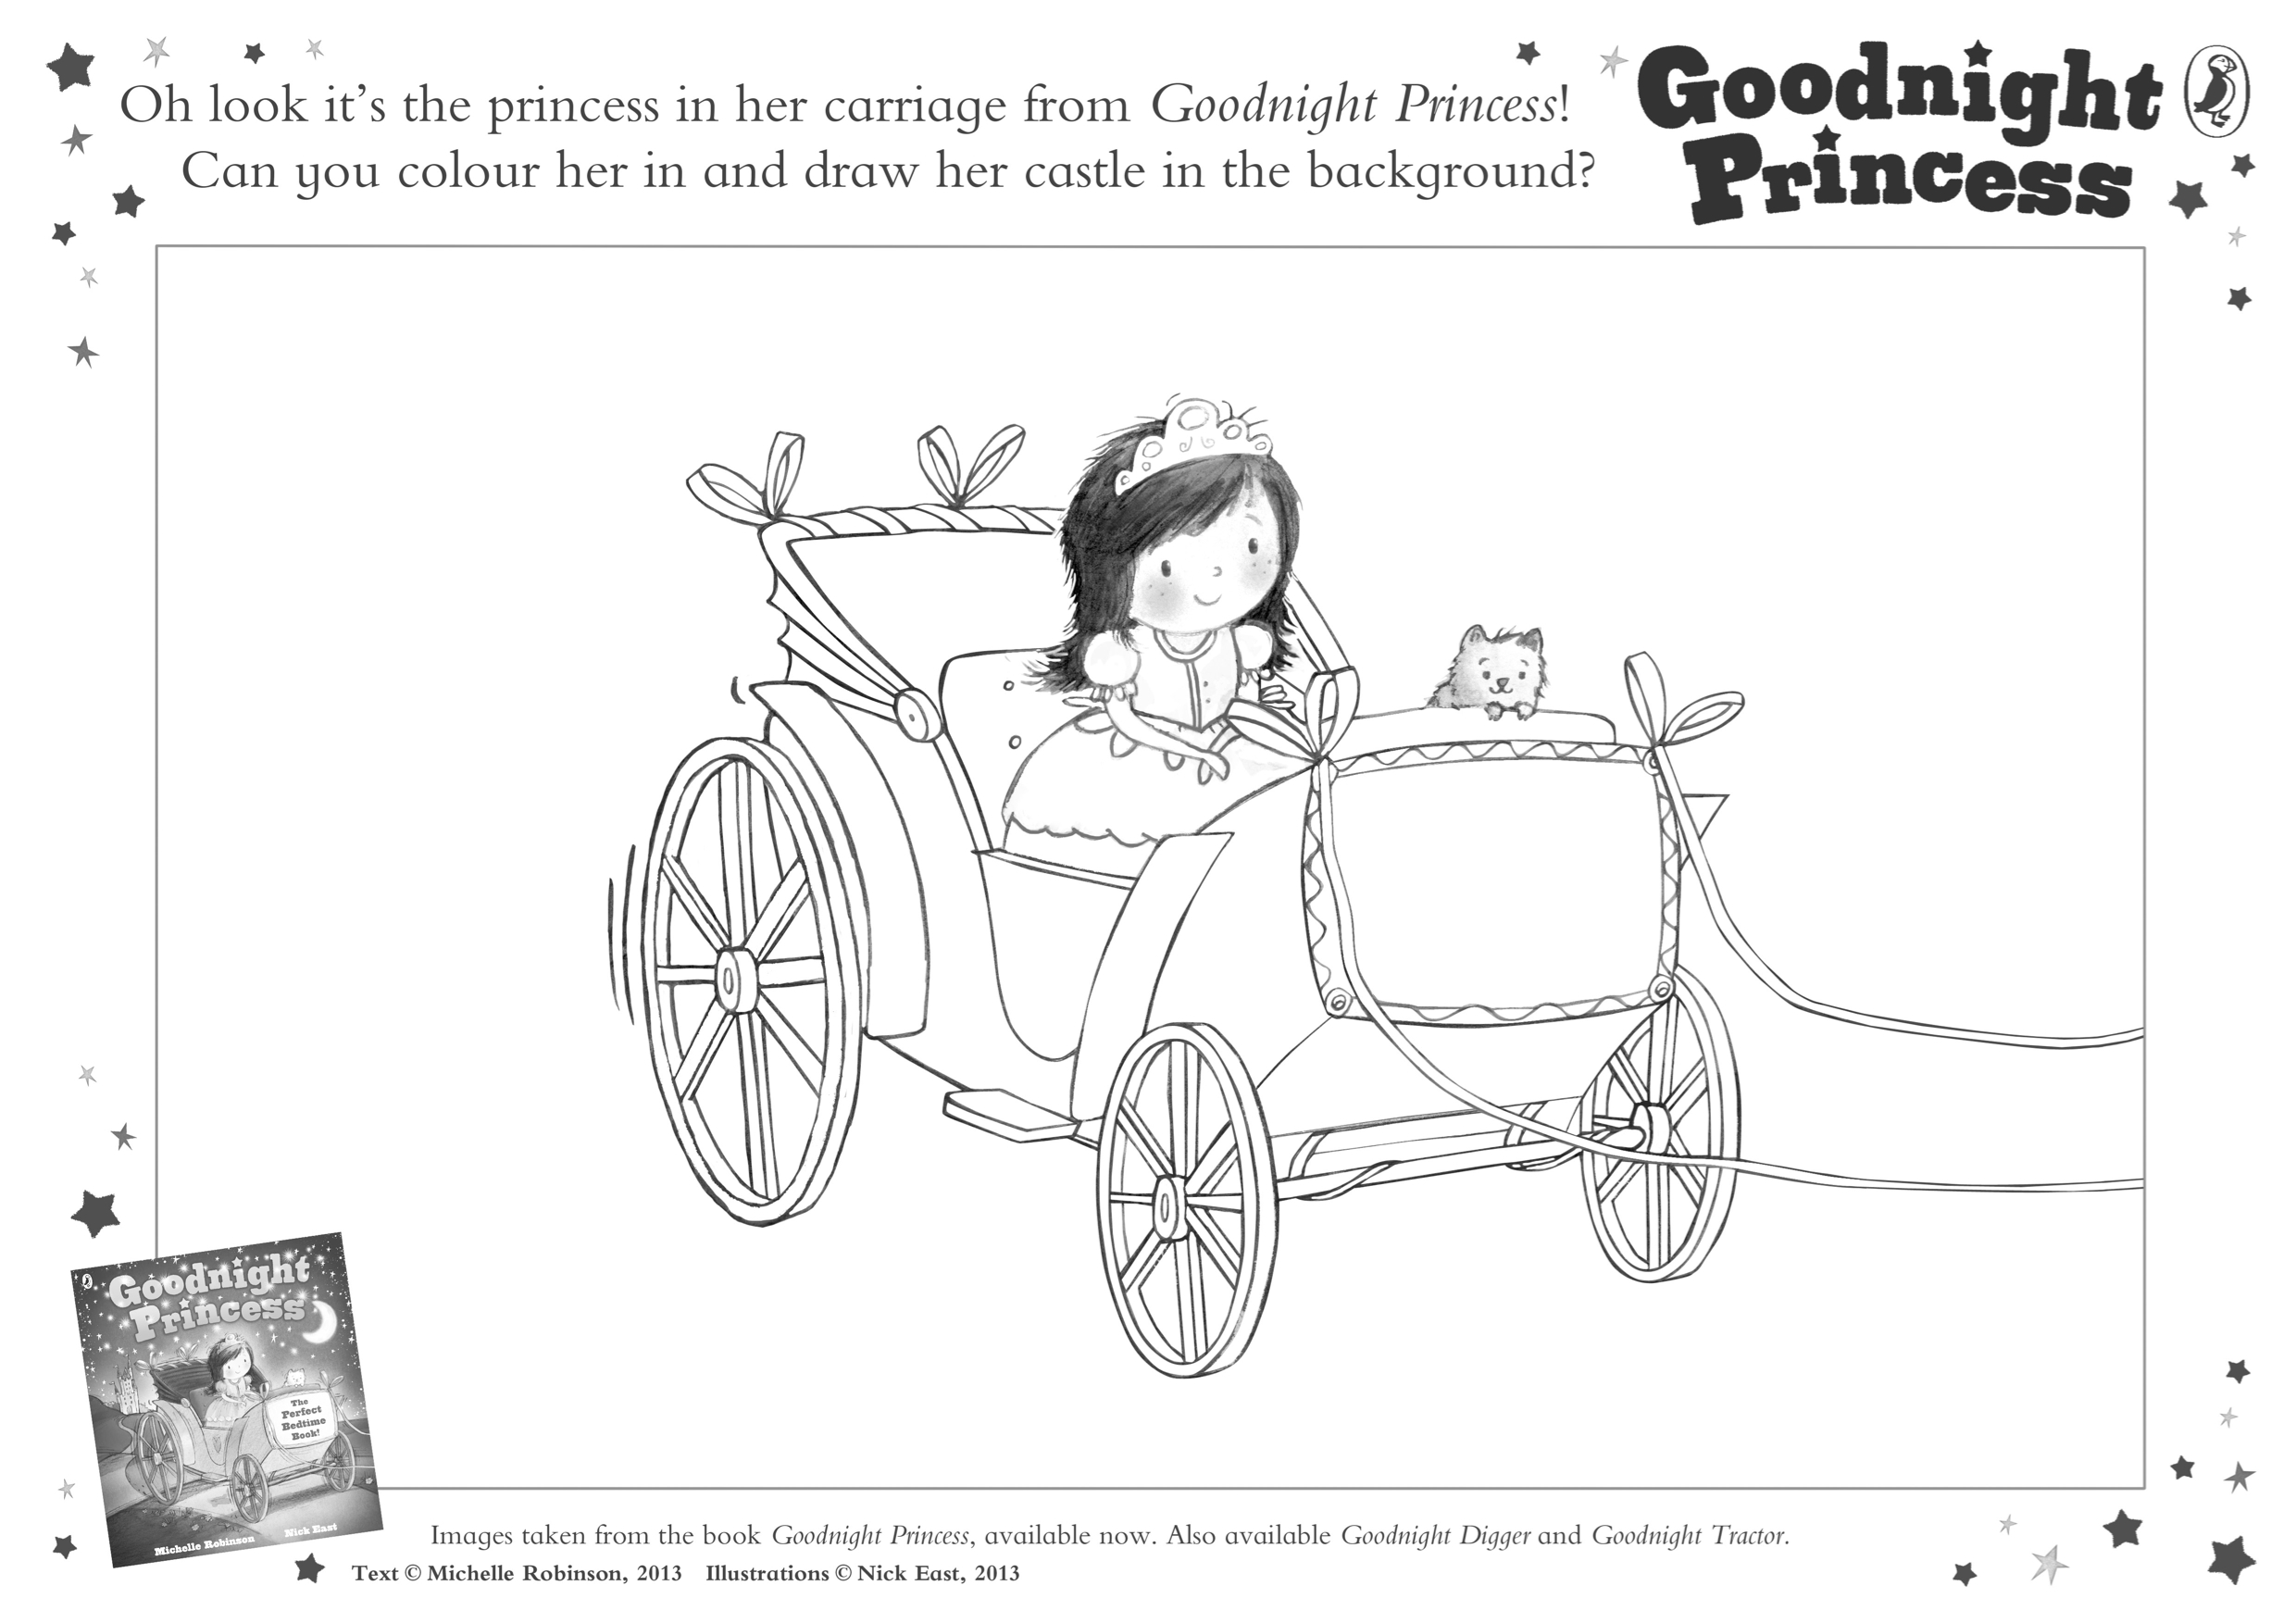 Colouring sheet for GOODNIGHT PRINCESS, picturing a child princess in a carriage with her cat.